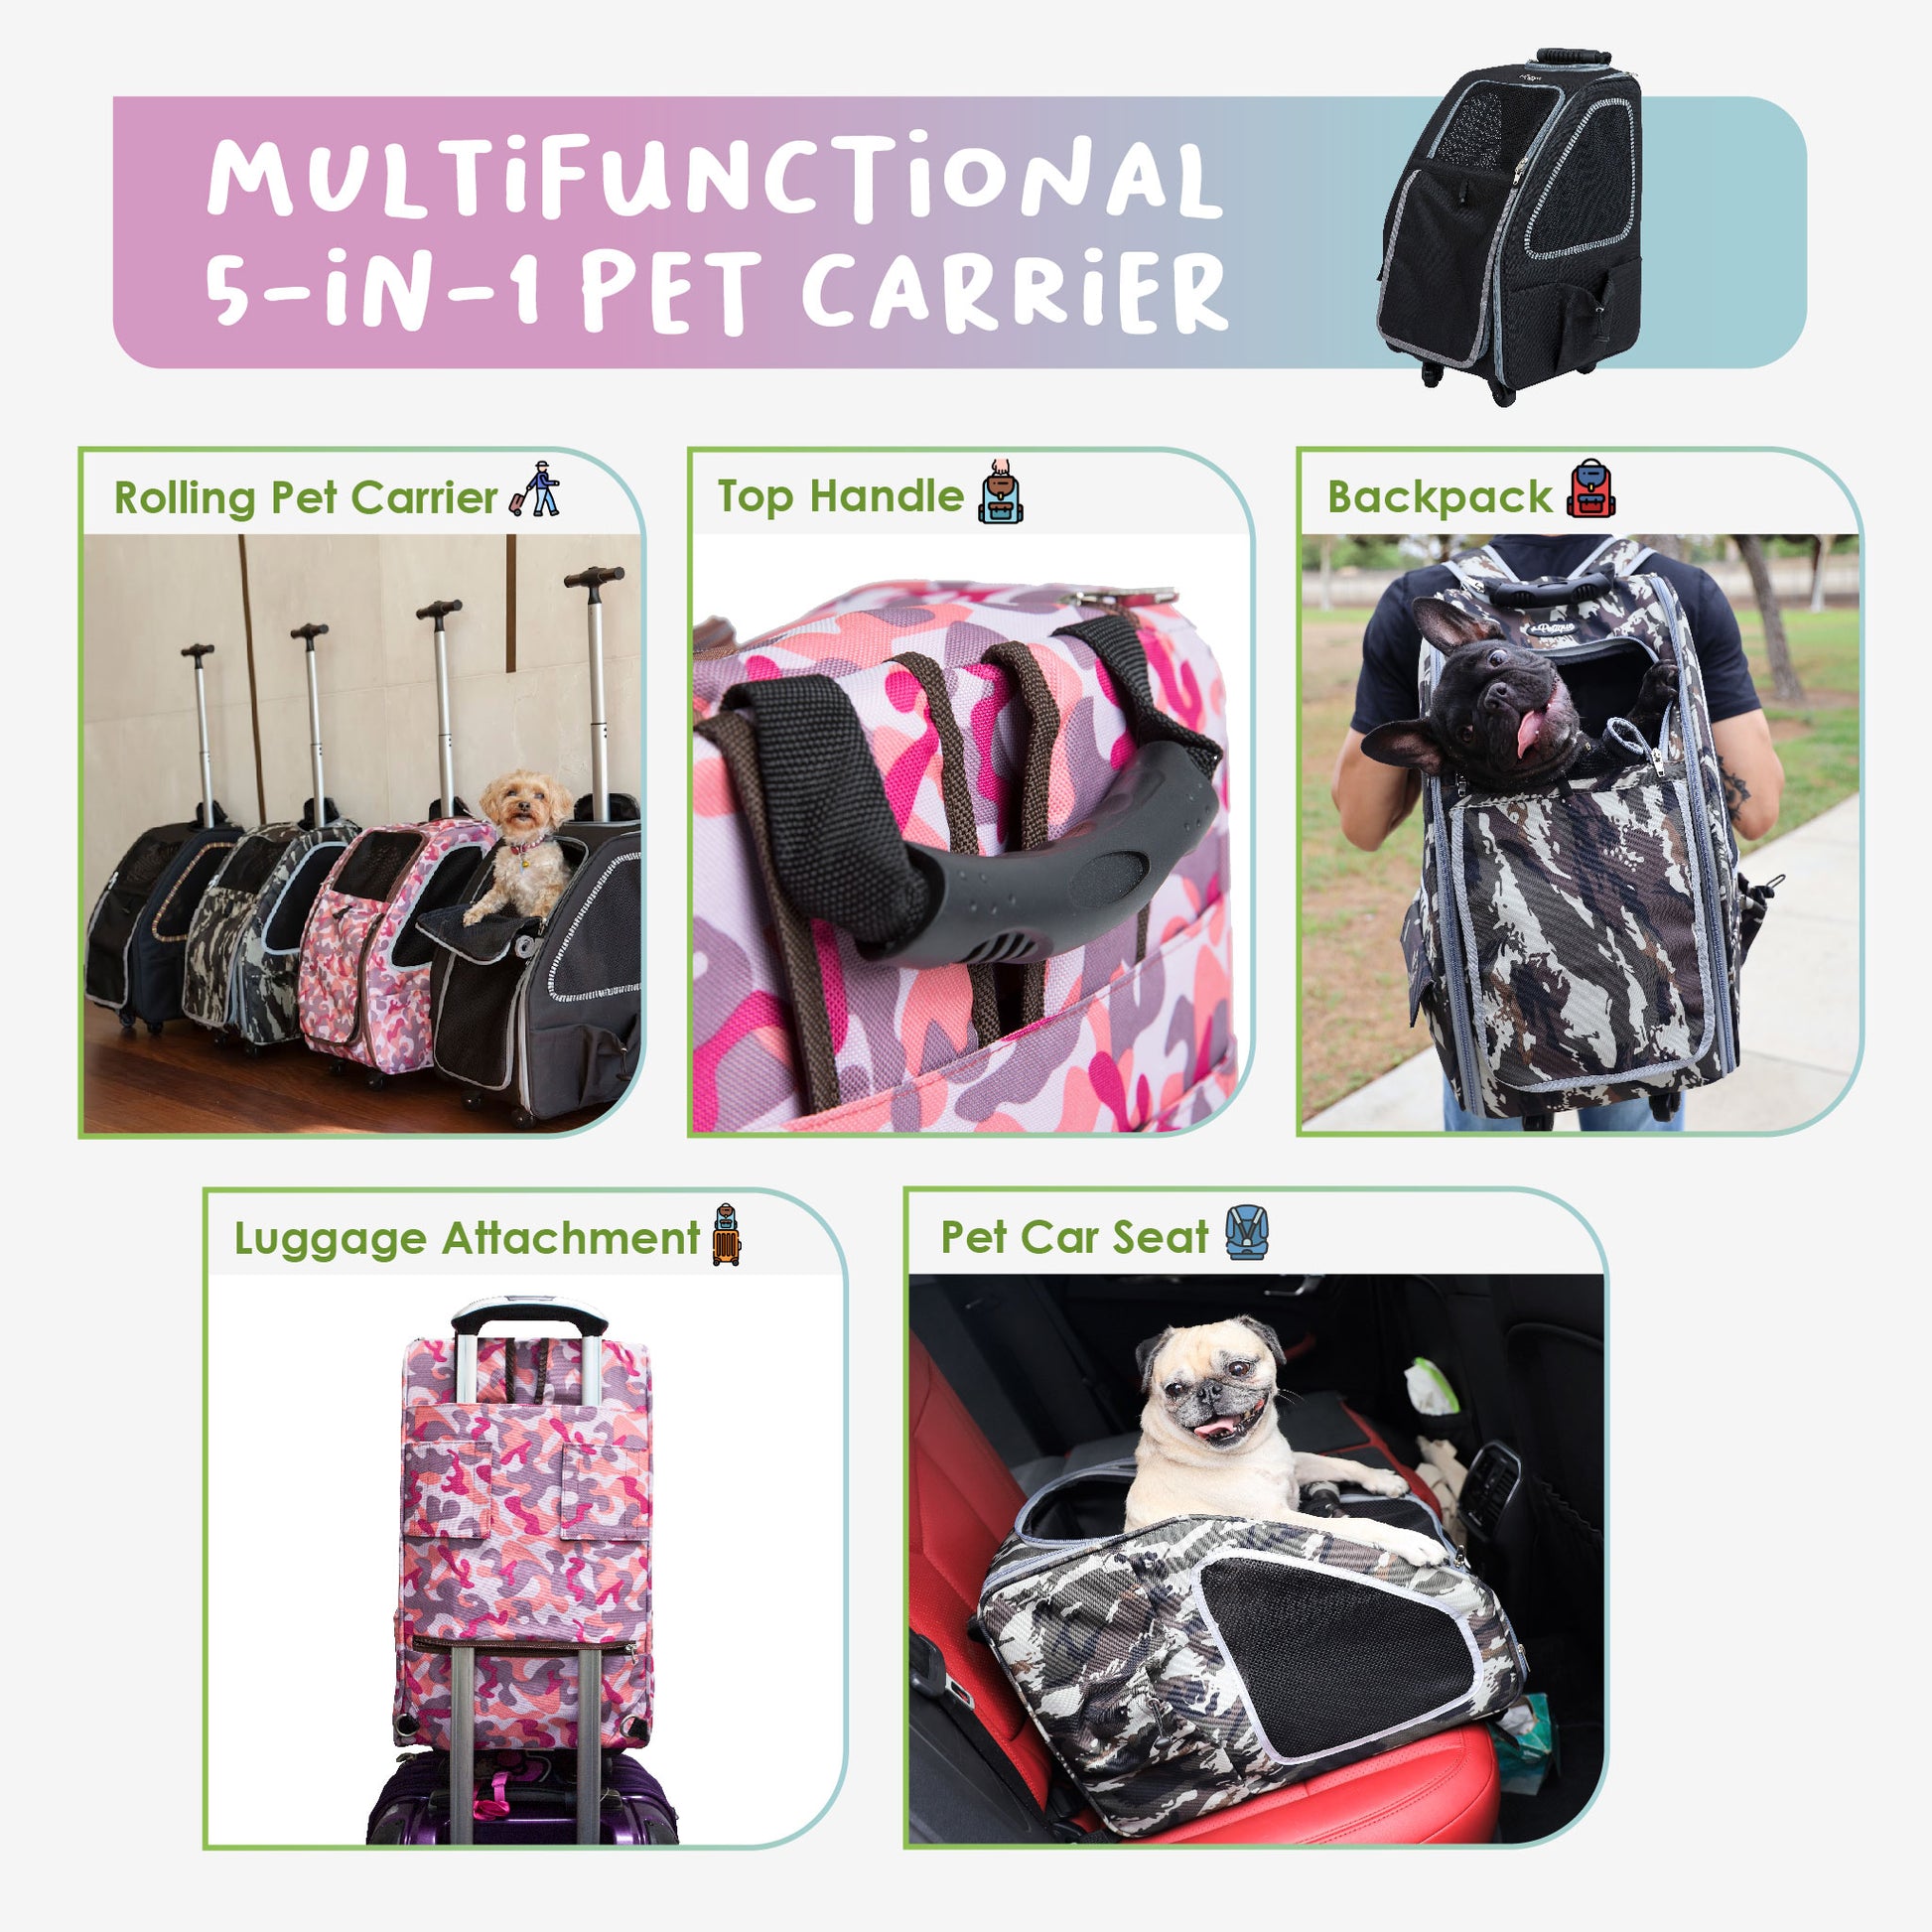 multi-functional 5-in-1 pet carrier for dogs and cats